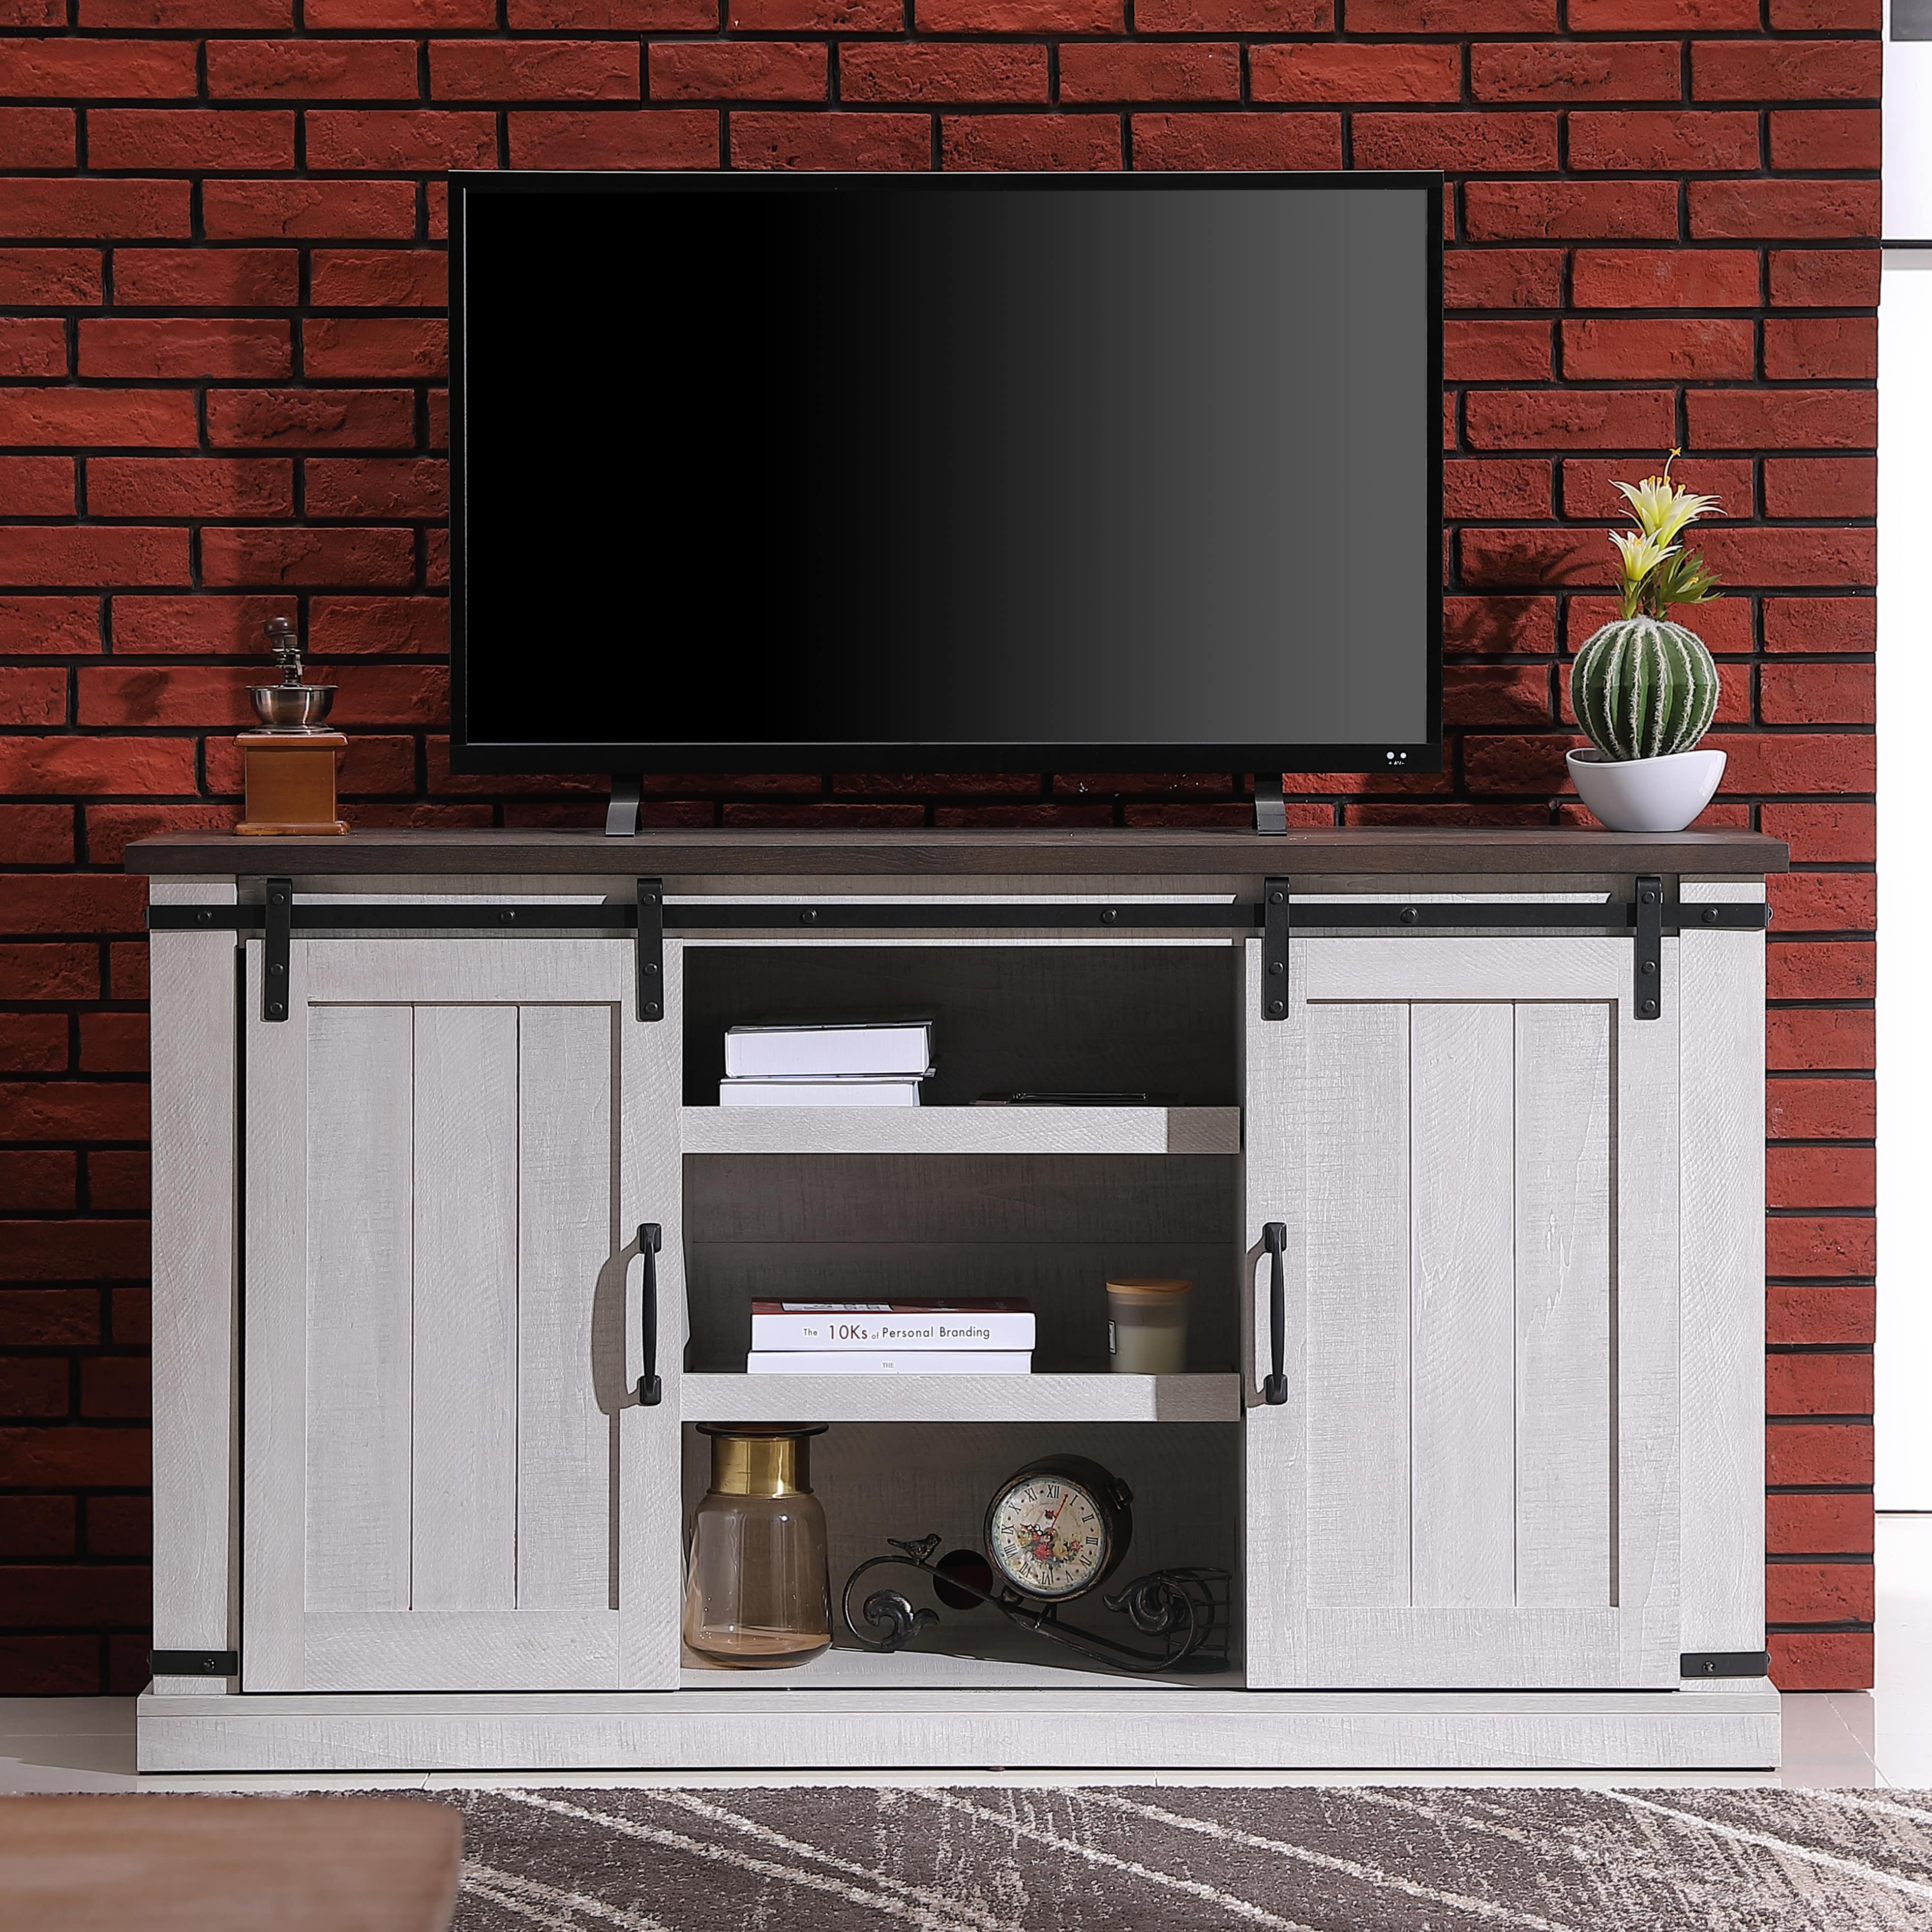 Richseat Barn Door TV Stand, Fits Most 60'' Flat Panel TVs, White Oak Finish - image 3 of 13